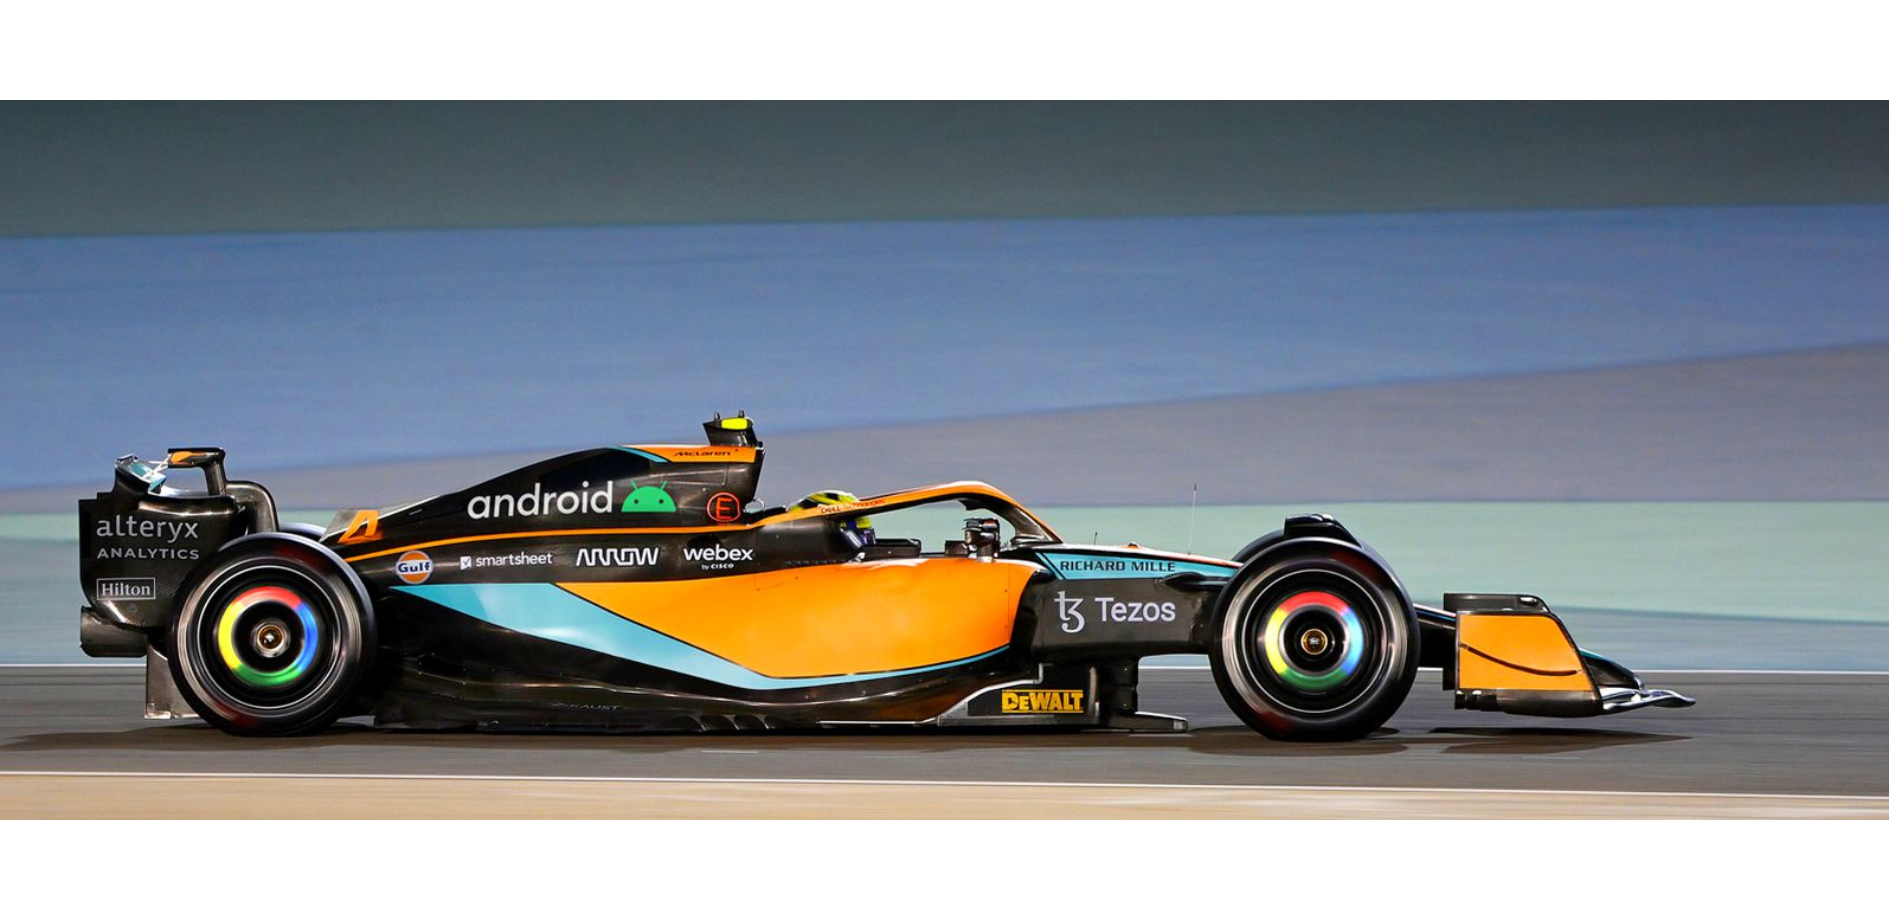 The new McLaren Racing Formula 1 car will have Chrome-accented wheels  thanks to a new partnership with Google -  News